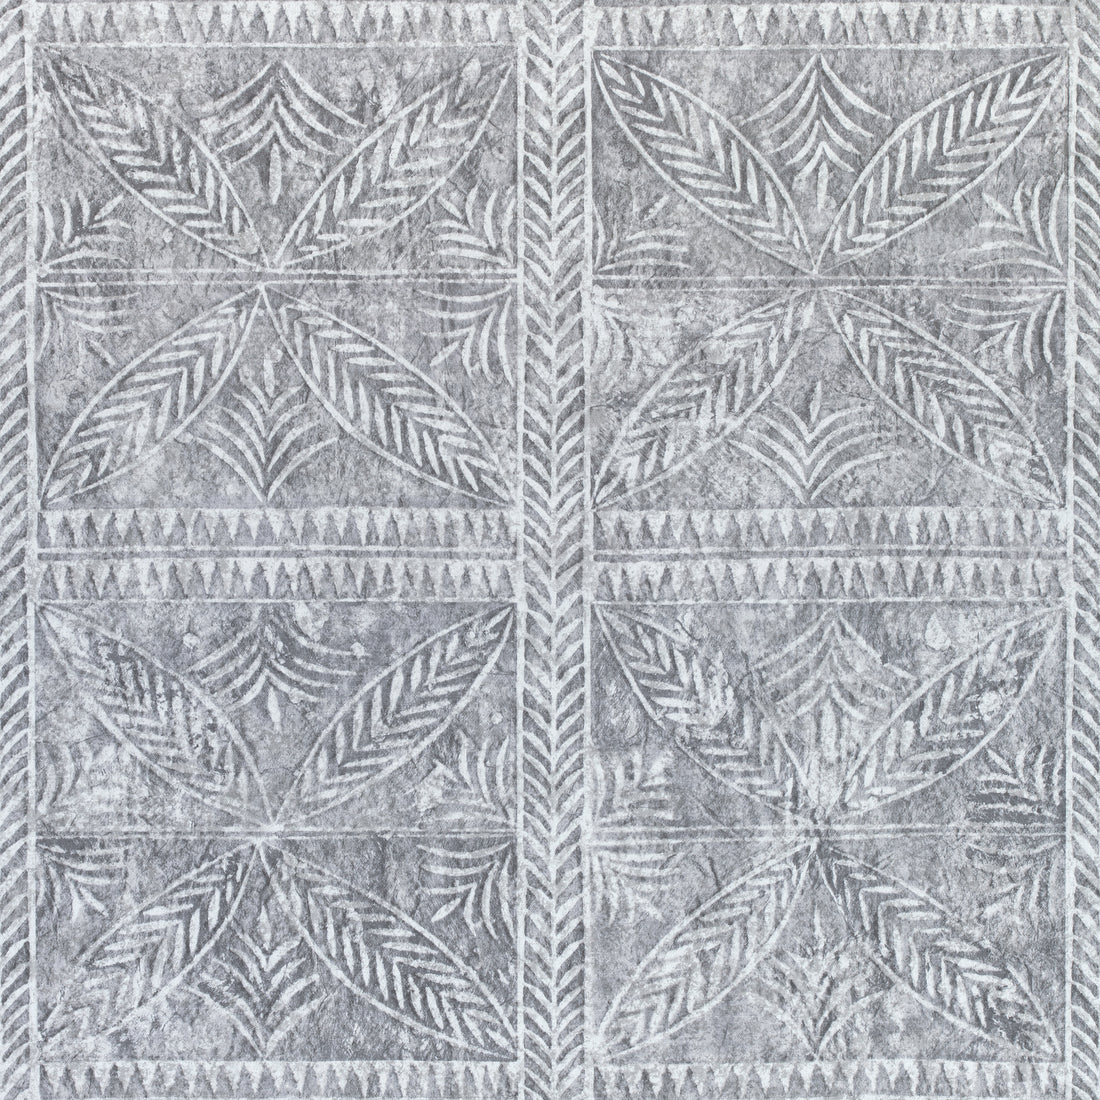 Timbuktu fabric in grey color - pattern number F910255 - by Thibaut in the Colony collection